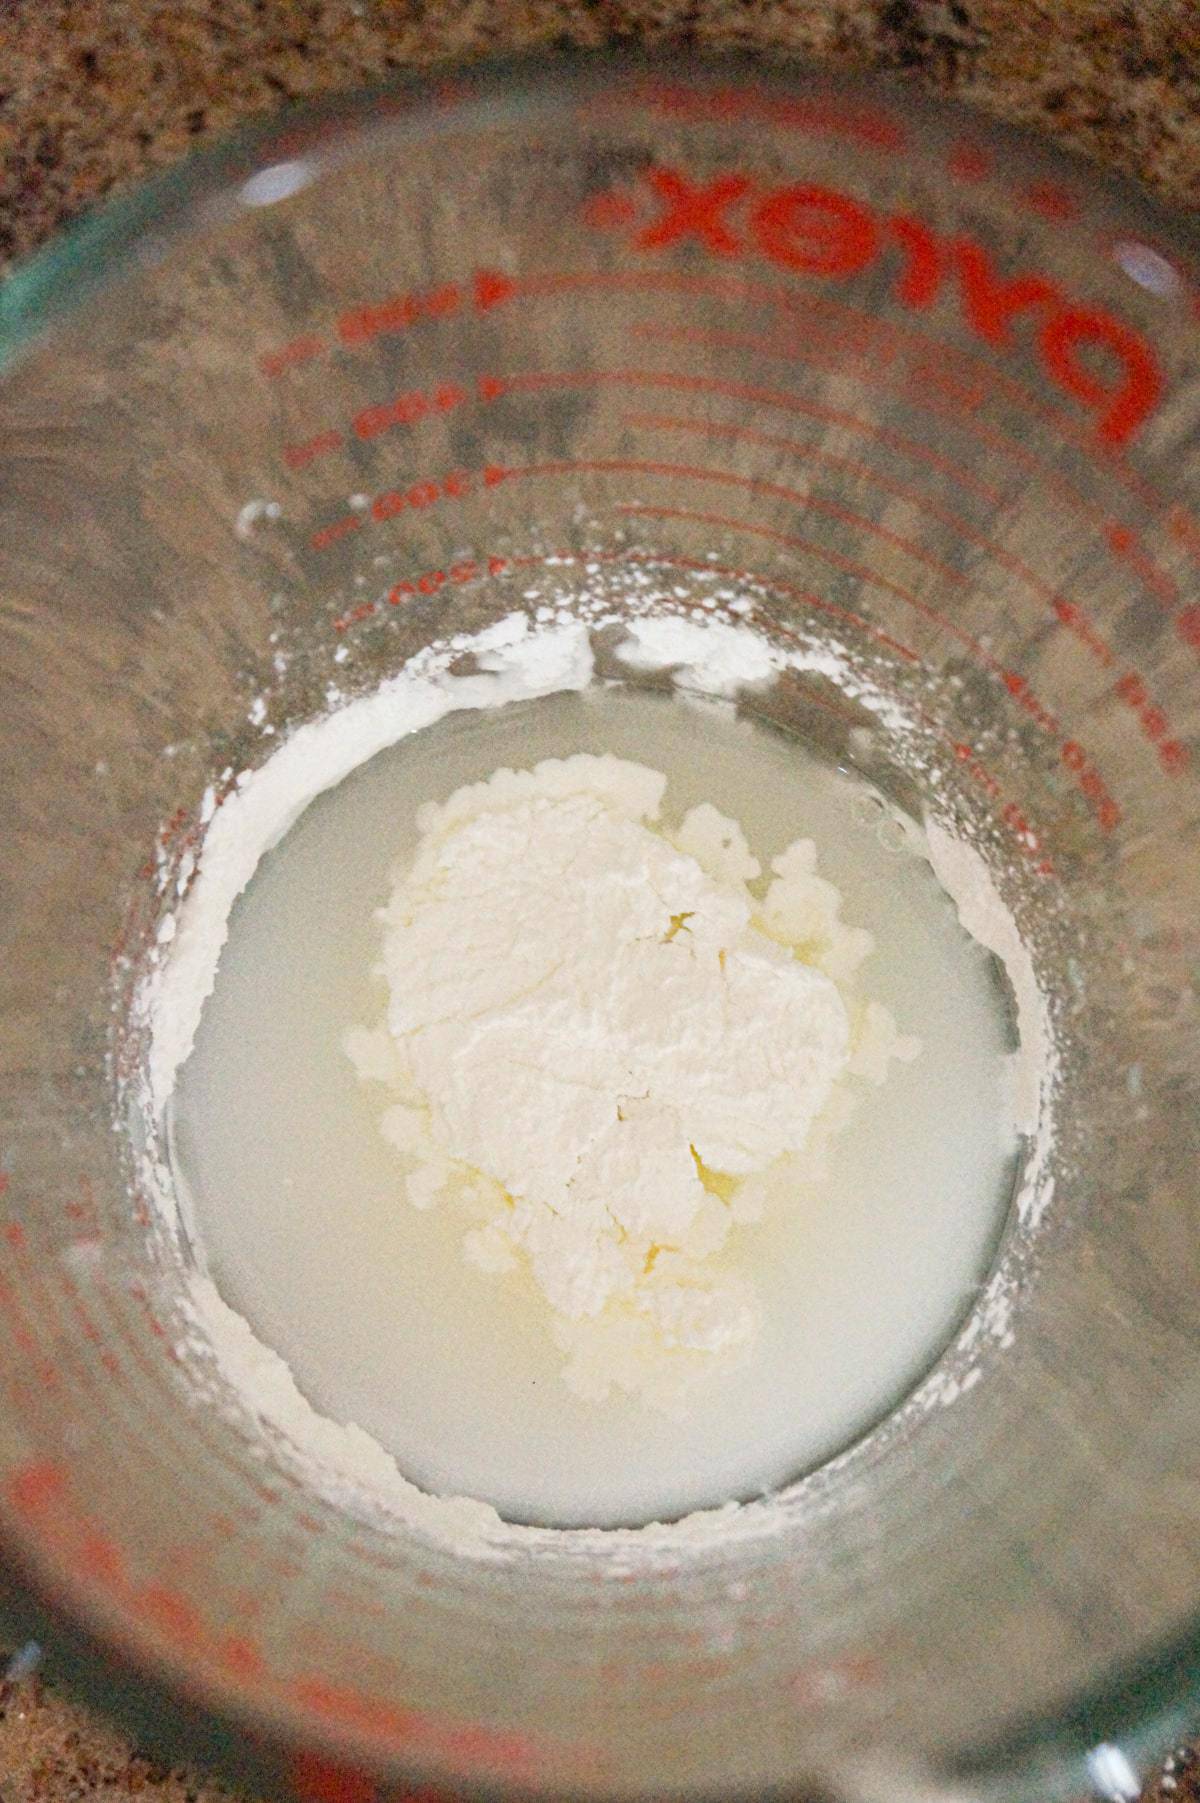 cornstarch and water in a glass measuring cup